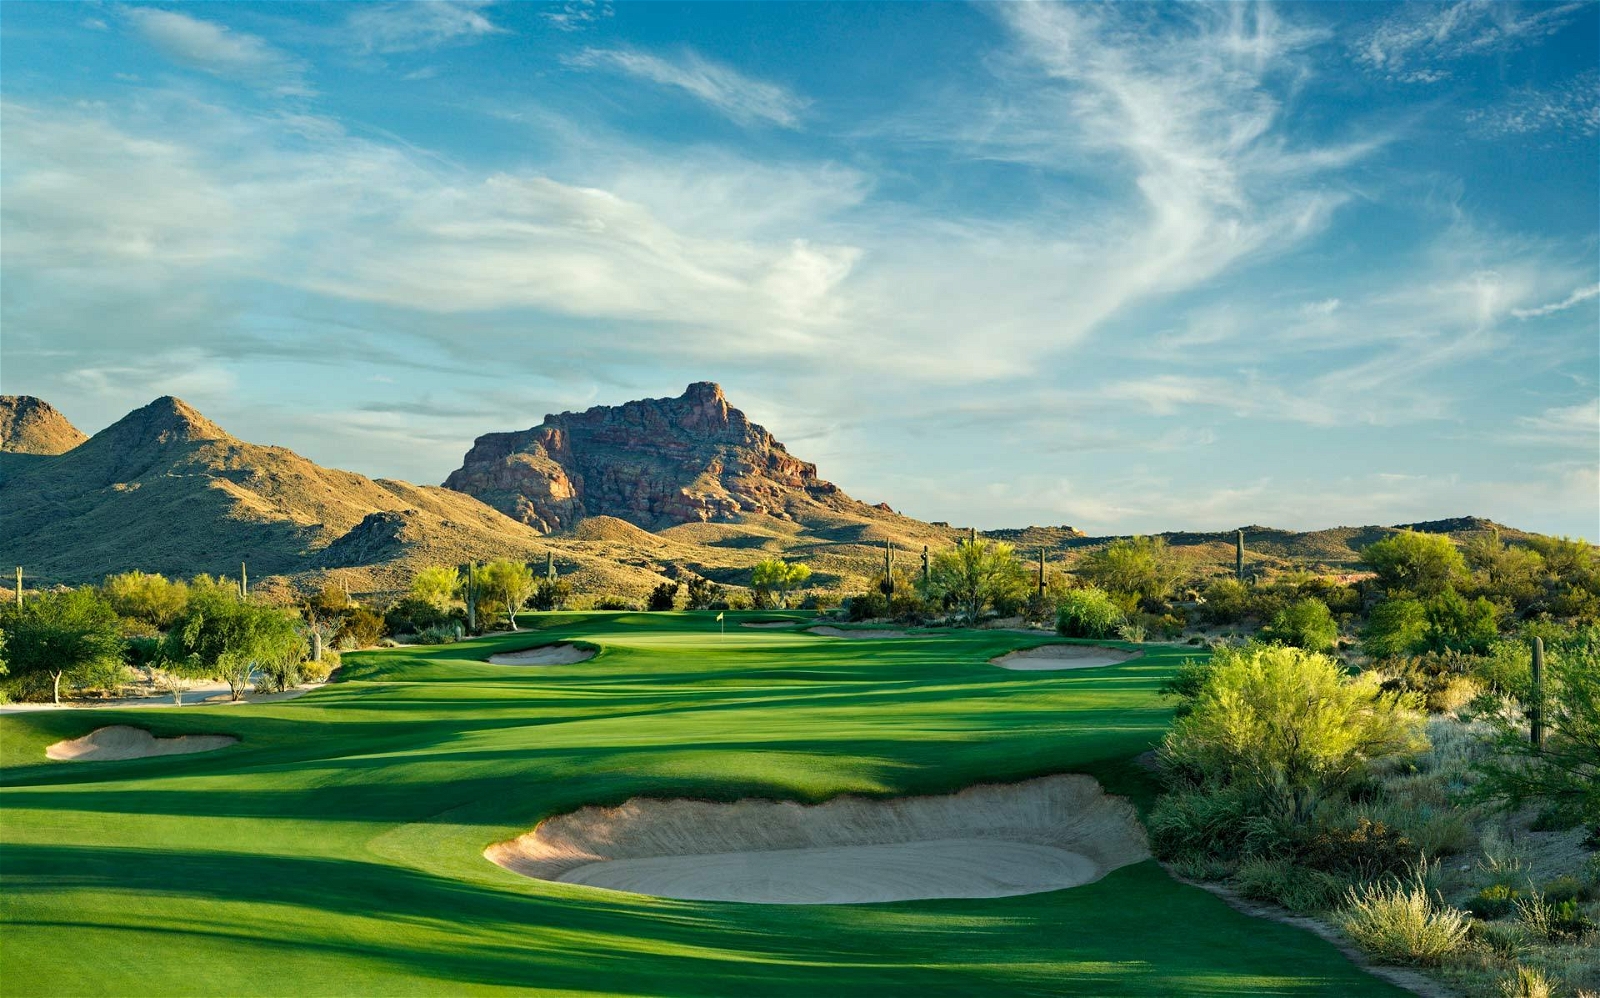 Golf Vacation Package - We-Ko-Pa Stay & Play + Legacy, Eagle Mtn & Desert Canyon from $212!